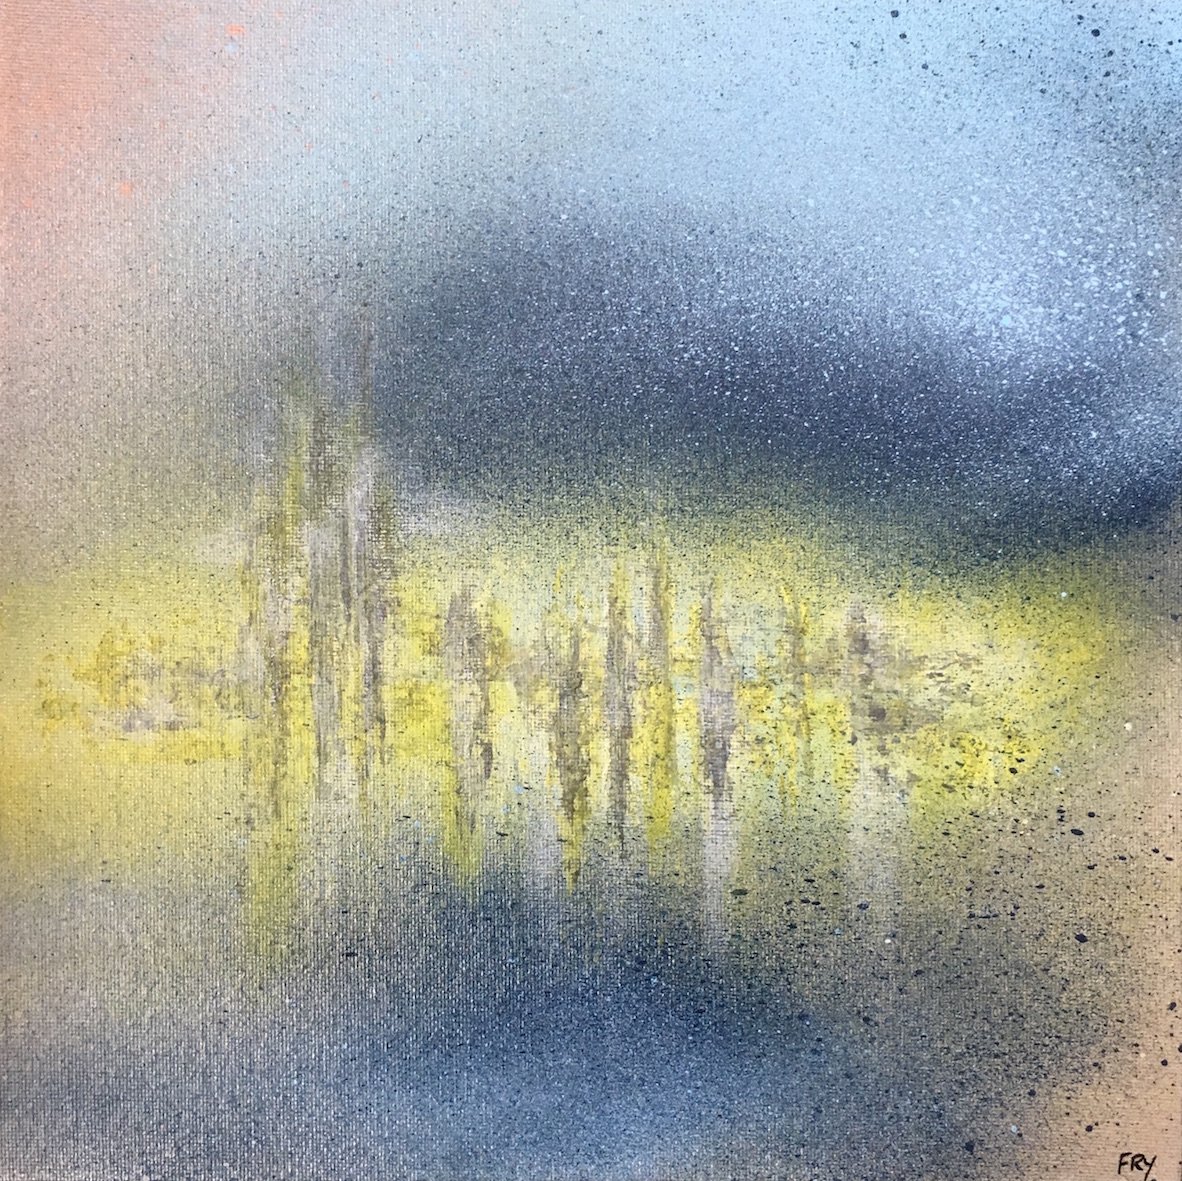 the city scatters the breeze, 2019